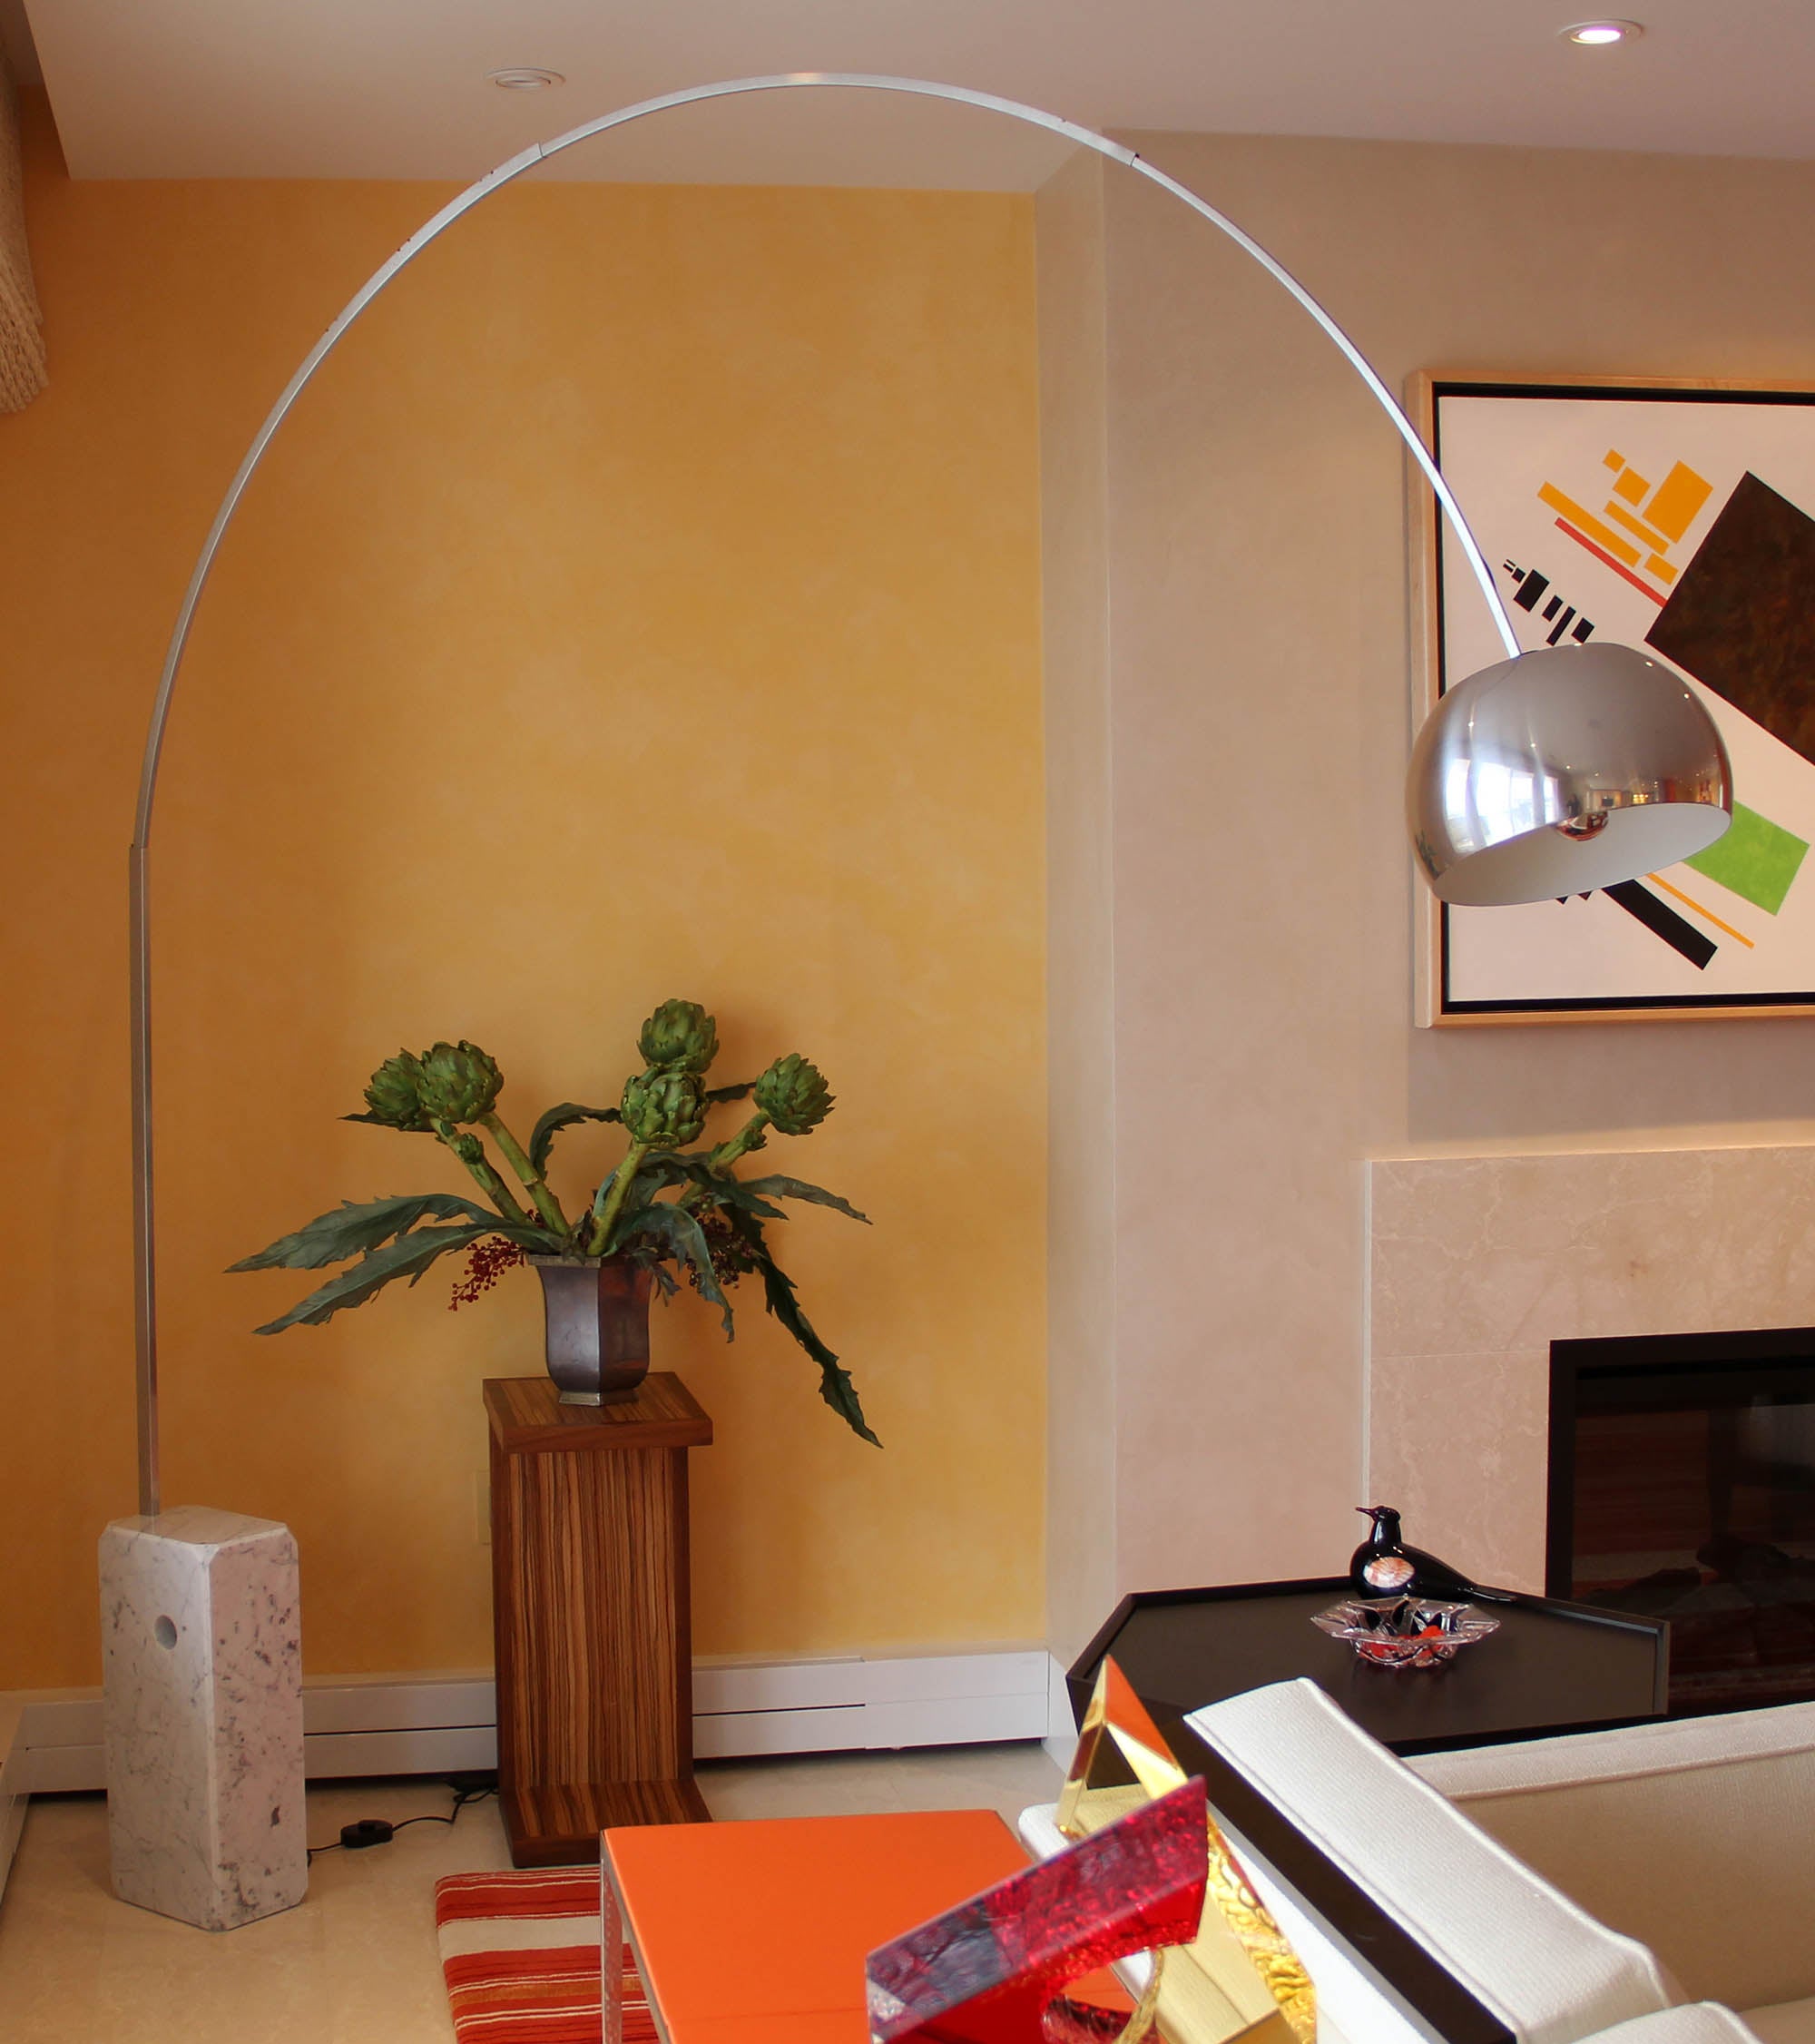 Classic Flos Arco Floor Lamp  by Achille and Pier Giacomo Castiglioni  For Sale